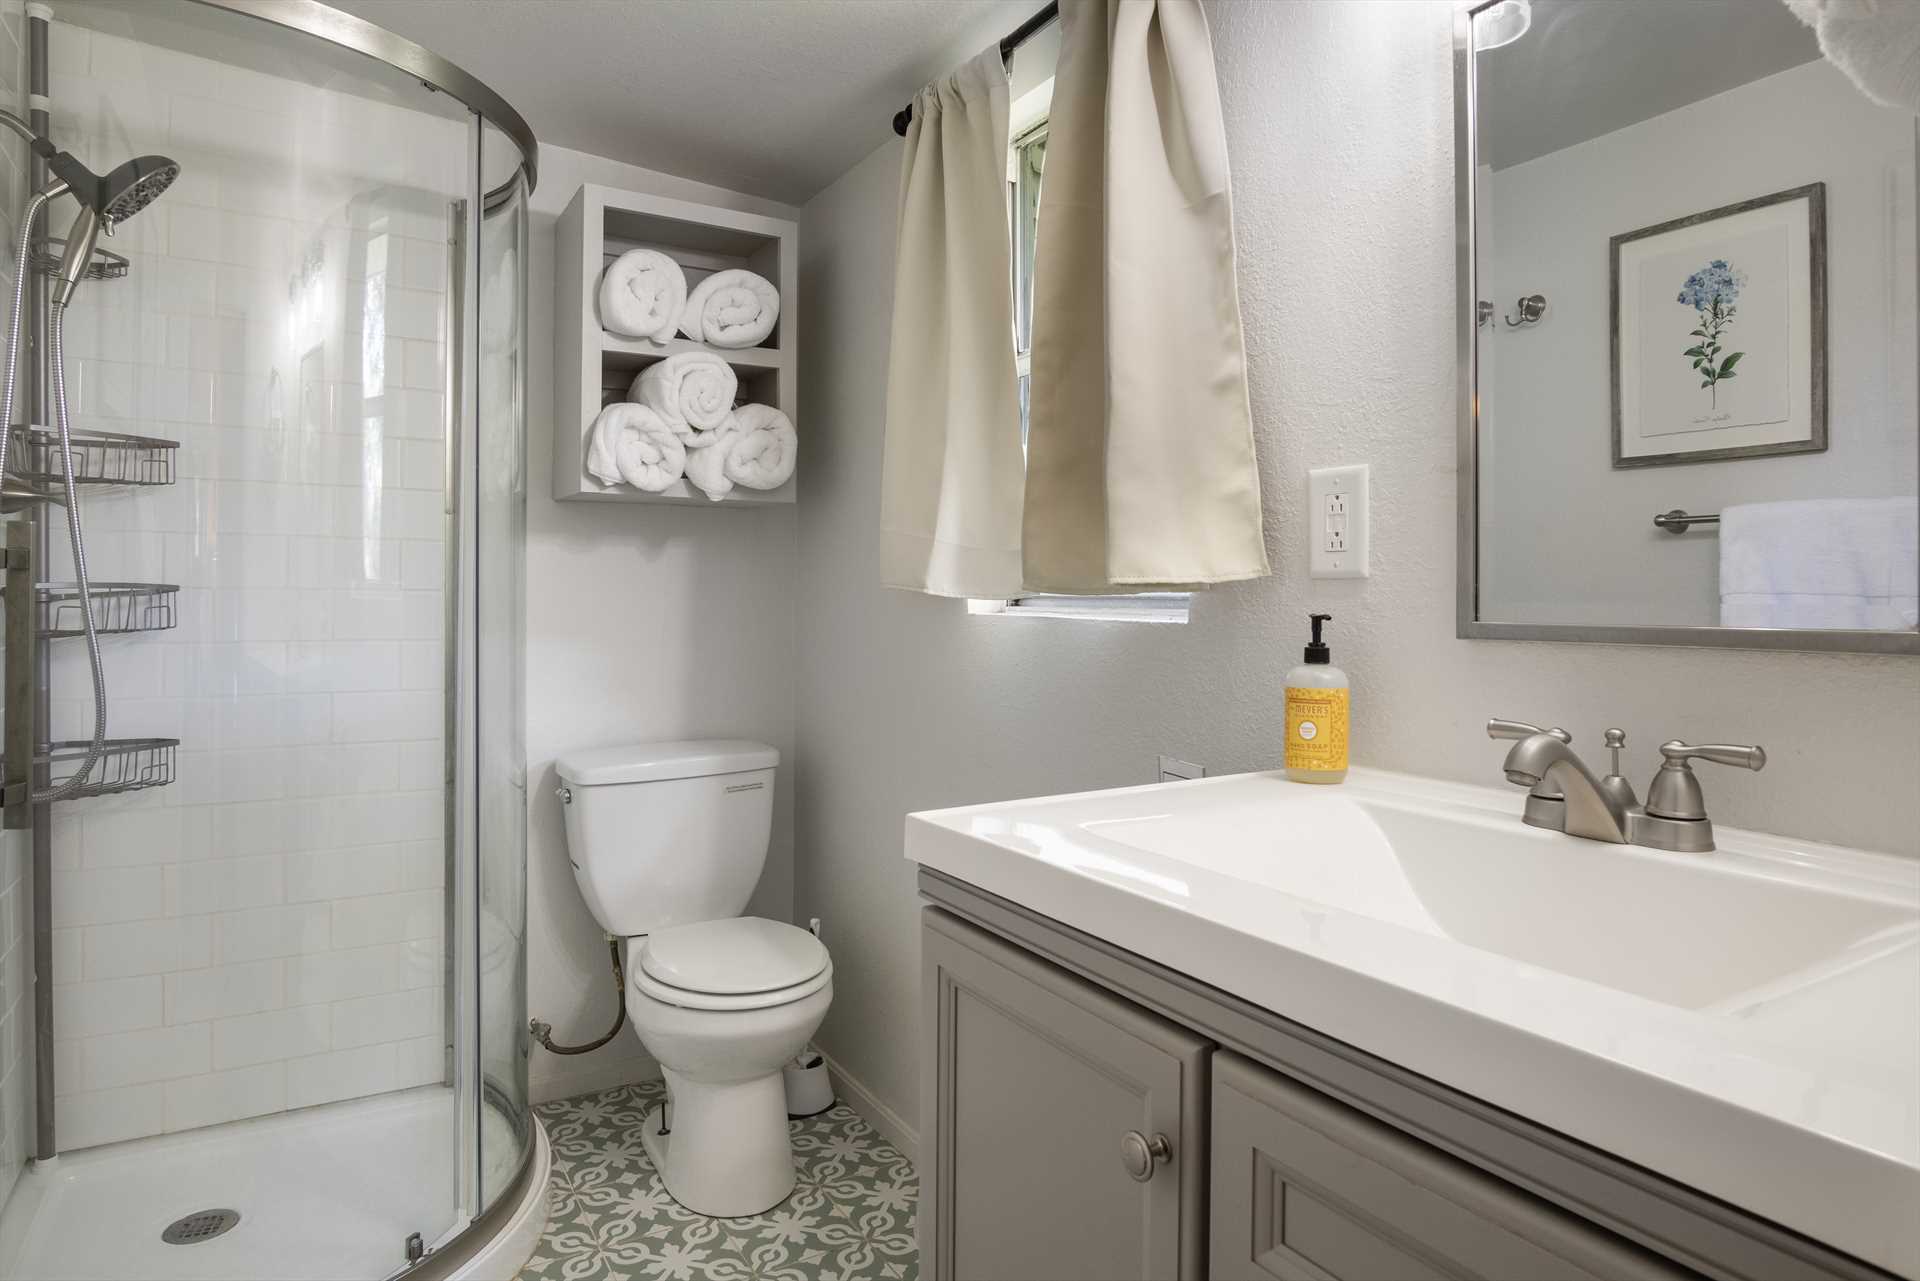                                                 A spotless full bath with a shower stall, which includes linens and basic necessities, is part of the master en suite.